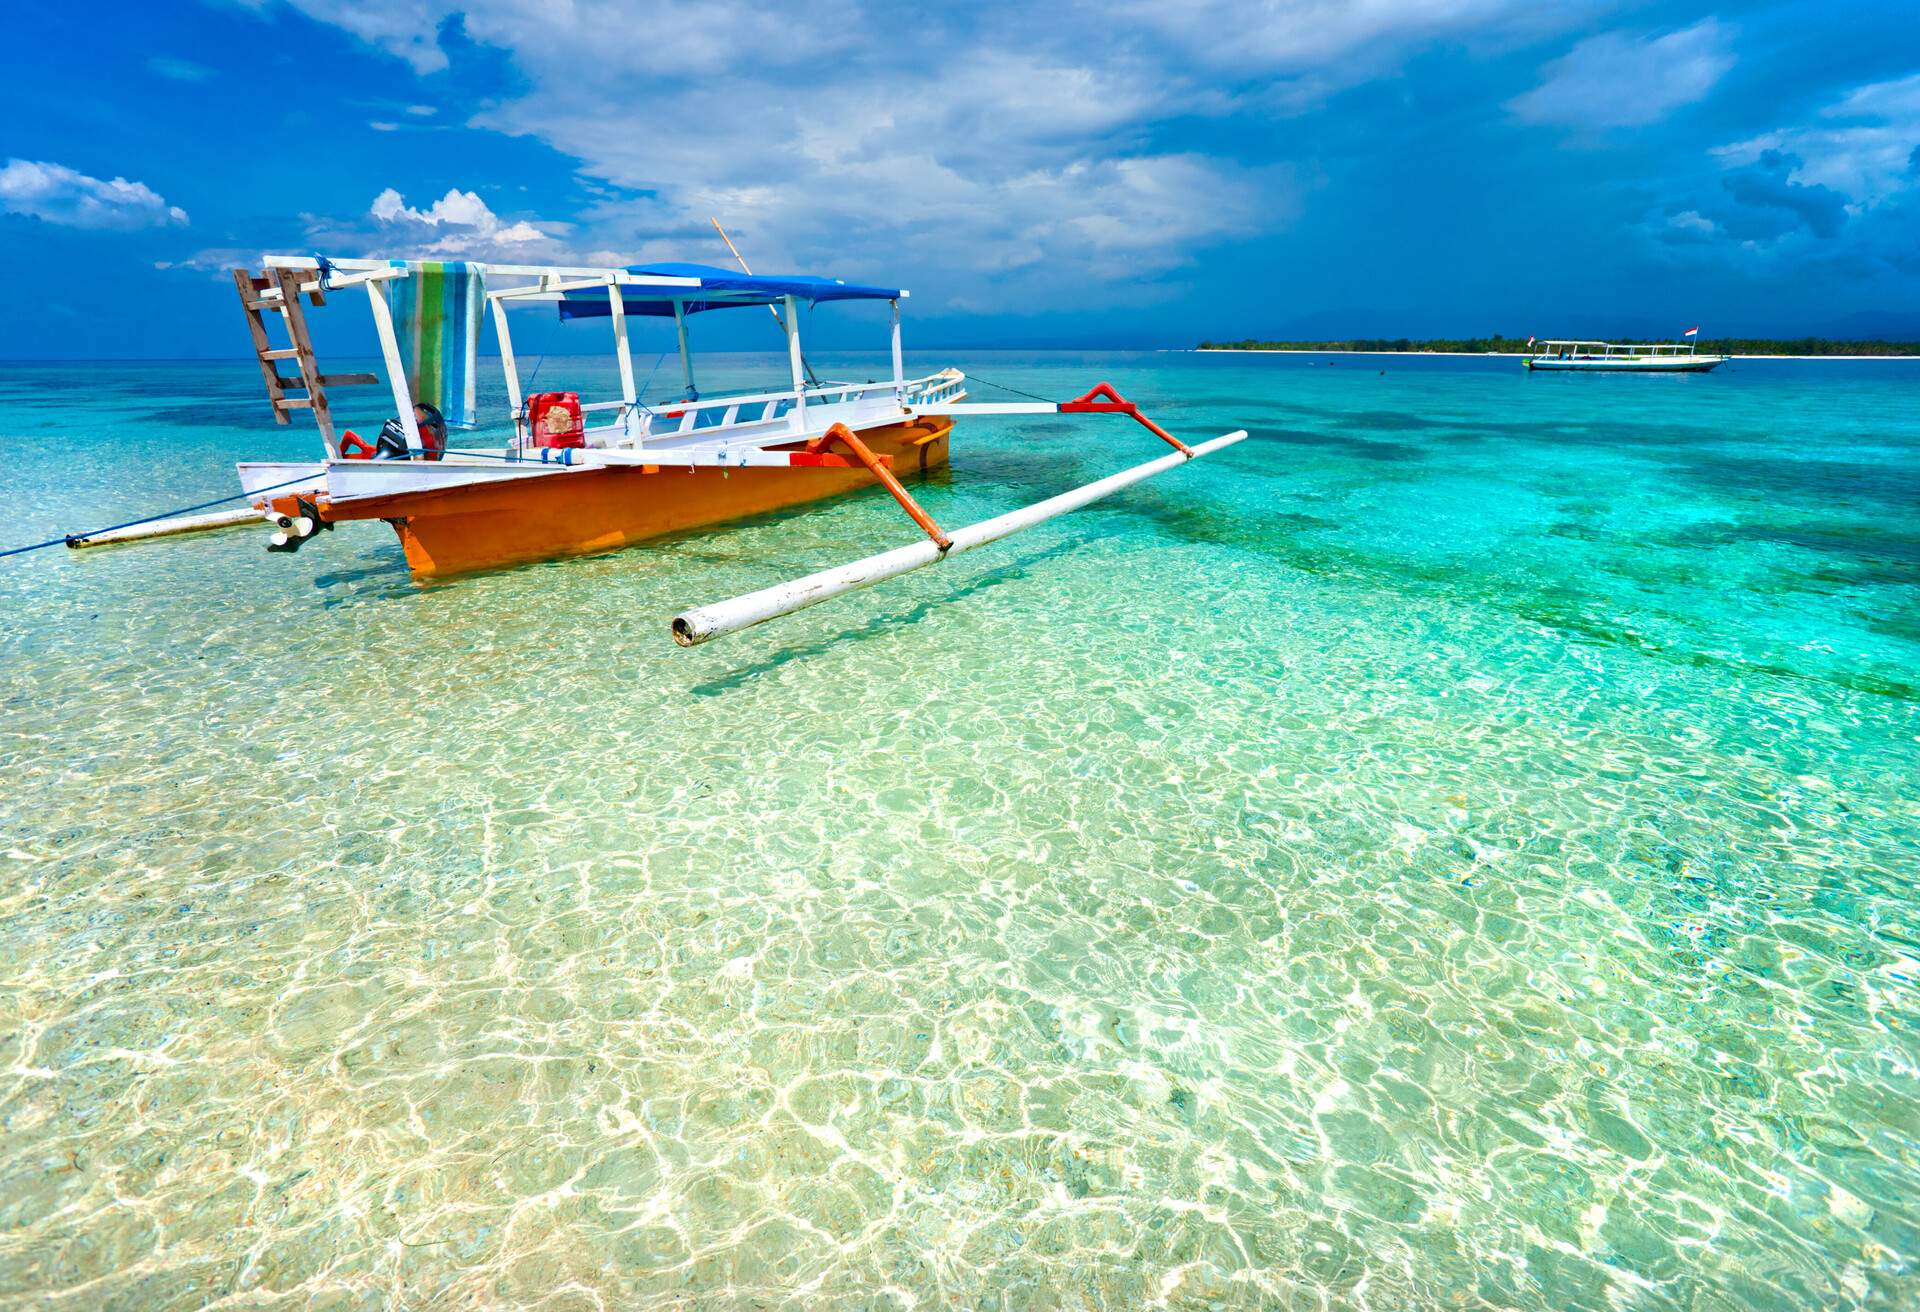 A stunning beach with a traditional double outrigger boat floating on crystal-clear waters.